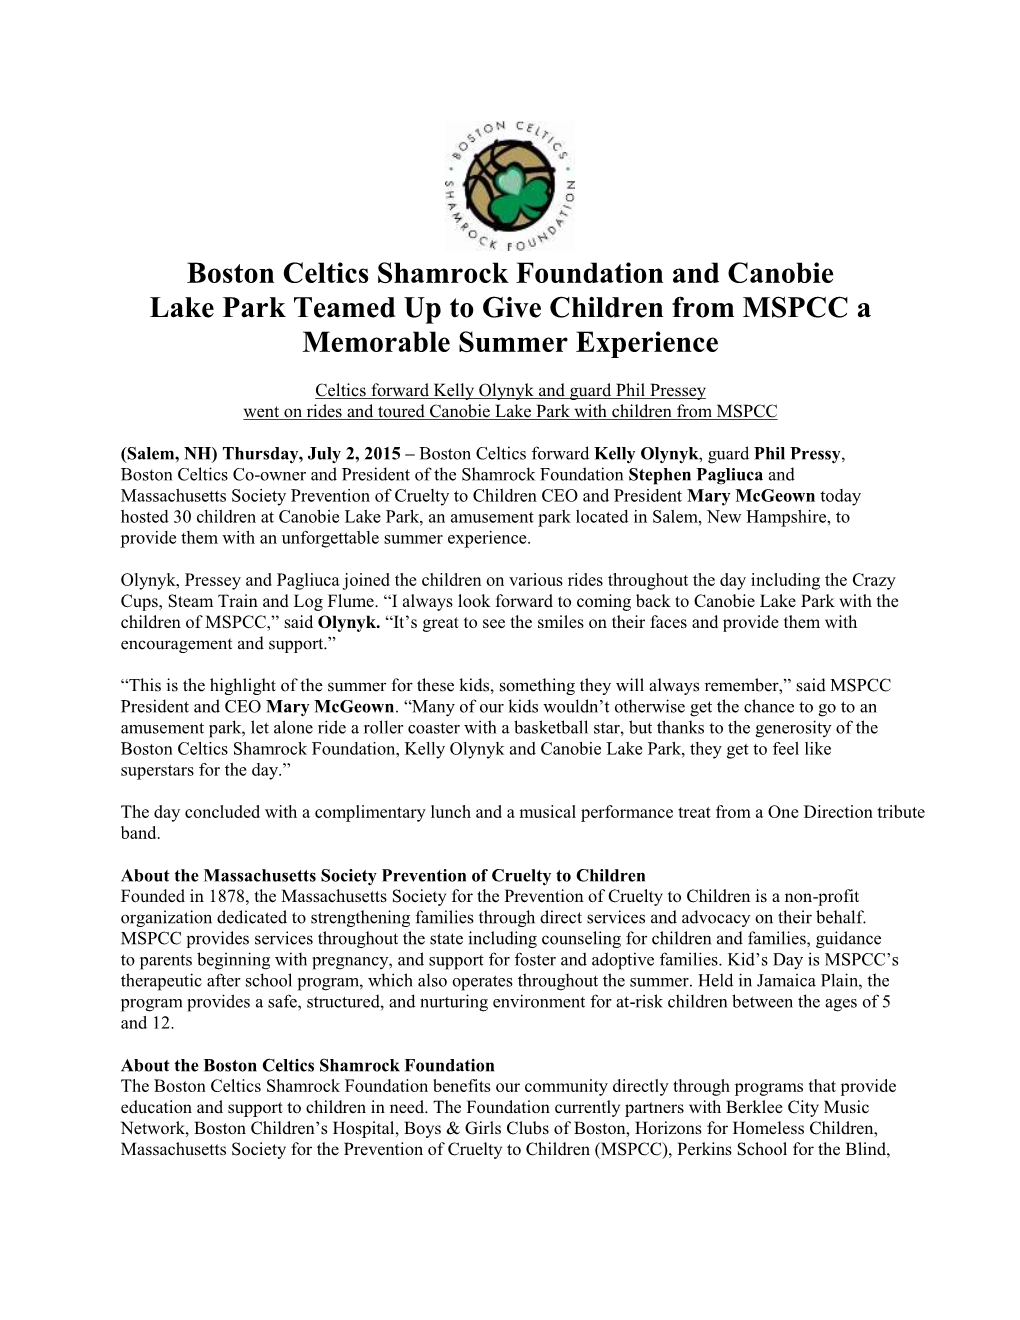 Boston Celtics Shamrock Foundation and Canobie Lake Park Teamed up to Give Children from MSPCC a Memorable Summer Experience